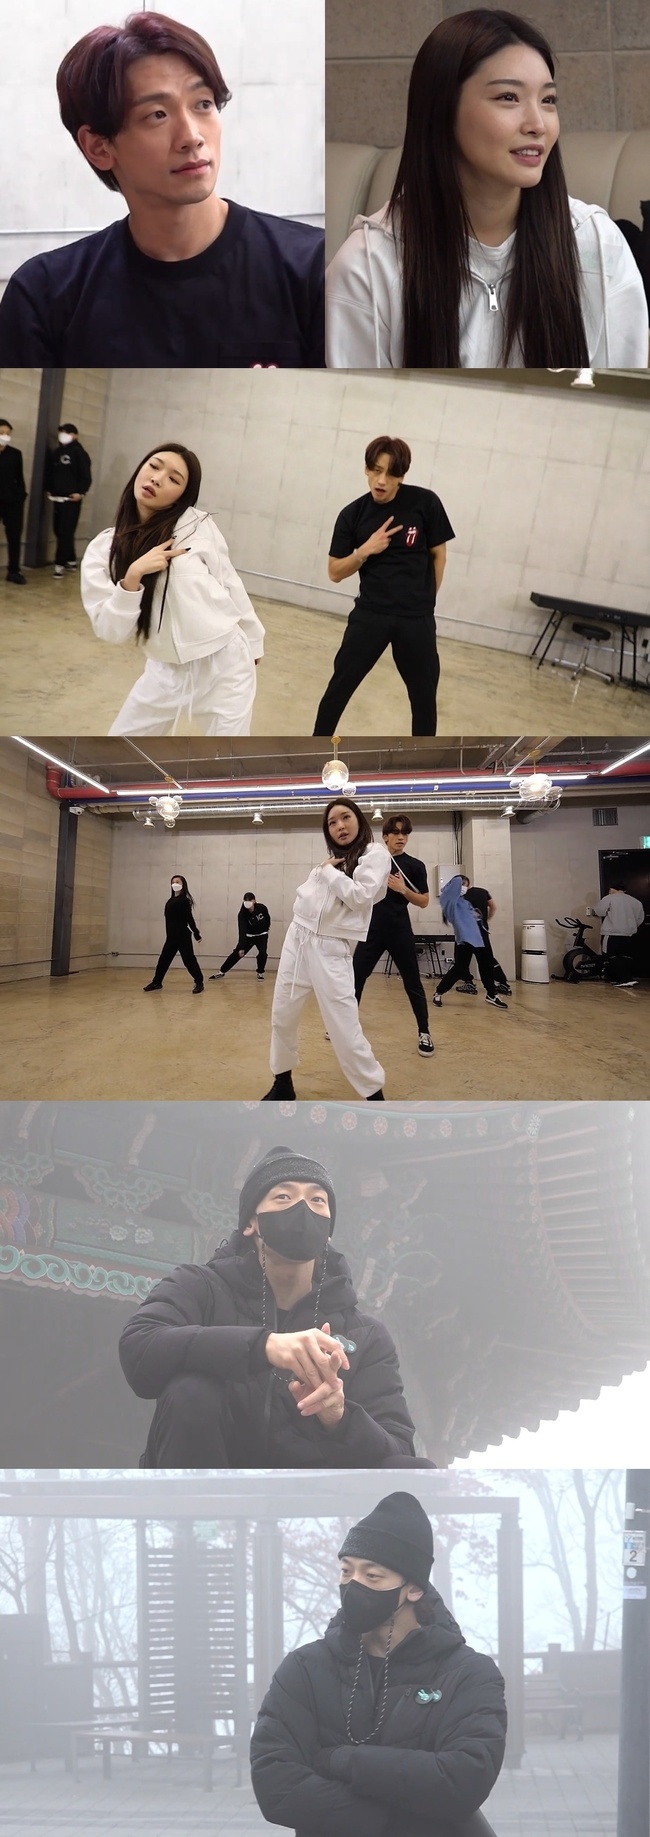 Singer Rain, Chunghas dance practice The Last Of Us: Left Behind is revealedMBC Point of Omniscient Interfere (planned by Park Jung-gyu / directed by Noshi Yong, Chae Hyun-seok / hereinafter Point of Omniscient Interfere) broadcast on February 27th, 142 times will reveal the scene of the previous class of Cullaber of Rain and Chungha.The photo shows Rain and Chungha, who recently worked on a mini album together, and the two people who emit irreplaceable energy make the audience feel excited.The two will be horrified by powerful couple dances and performances.Especially, the senior and junior chemistry outside the stage of Rain and Chungha also adds curiosity.In the meantime, Rains manager makes Chungha burst into bread with the wrong charm, which amplifies curiosity. In addition, Managers surprise reversal past is also revealed.